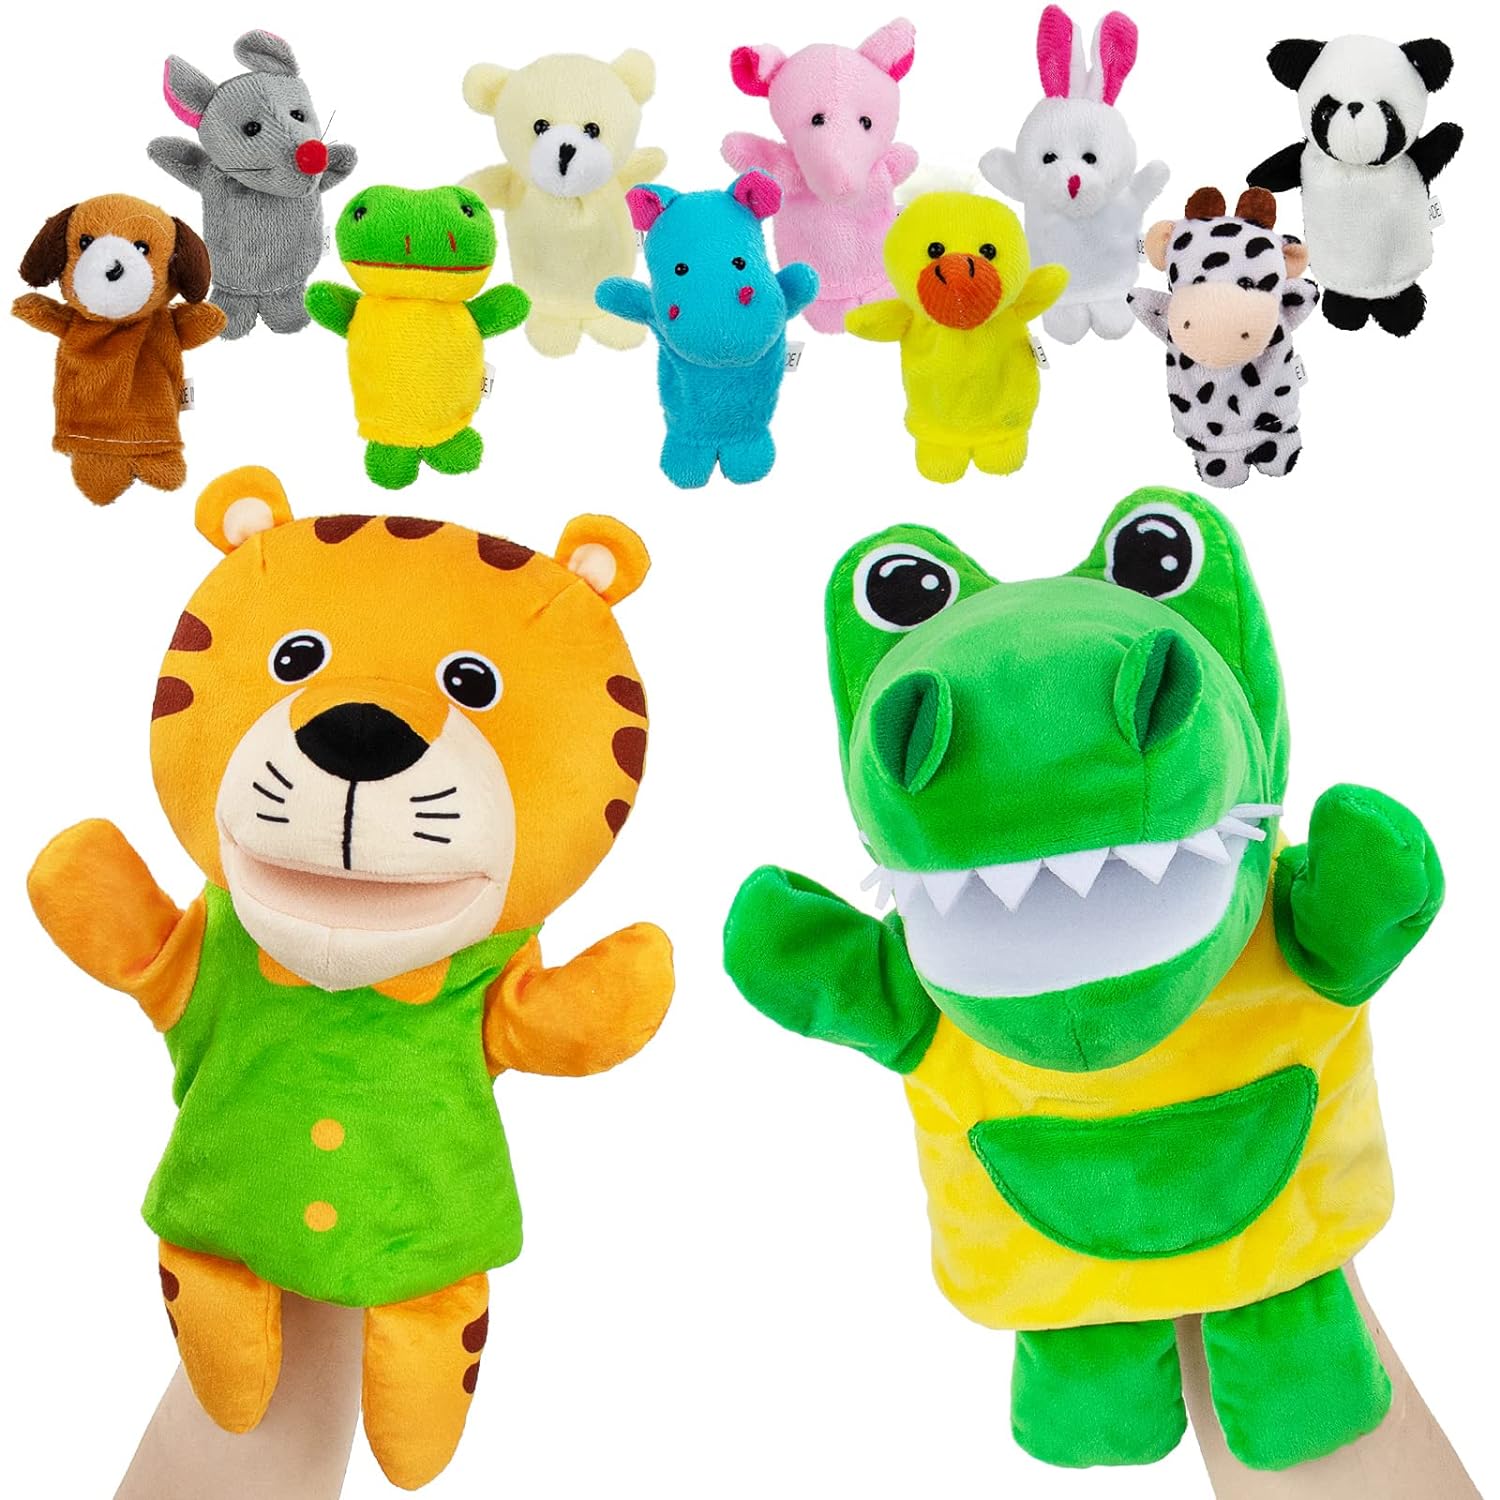 Great Choice Products Puppets With 2 Hand Puppets & 10 Finger Puppets - Soft Plush Animal Finger Puppet Toys For Kids, Mini Figures Toy Assortme